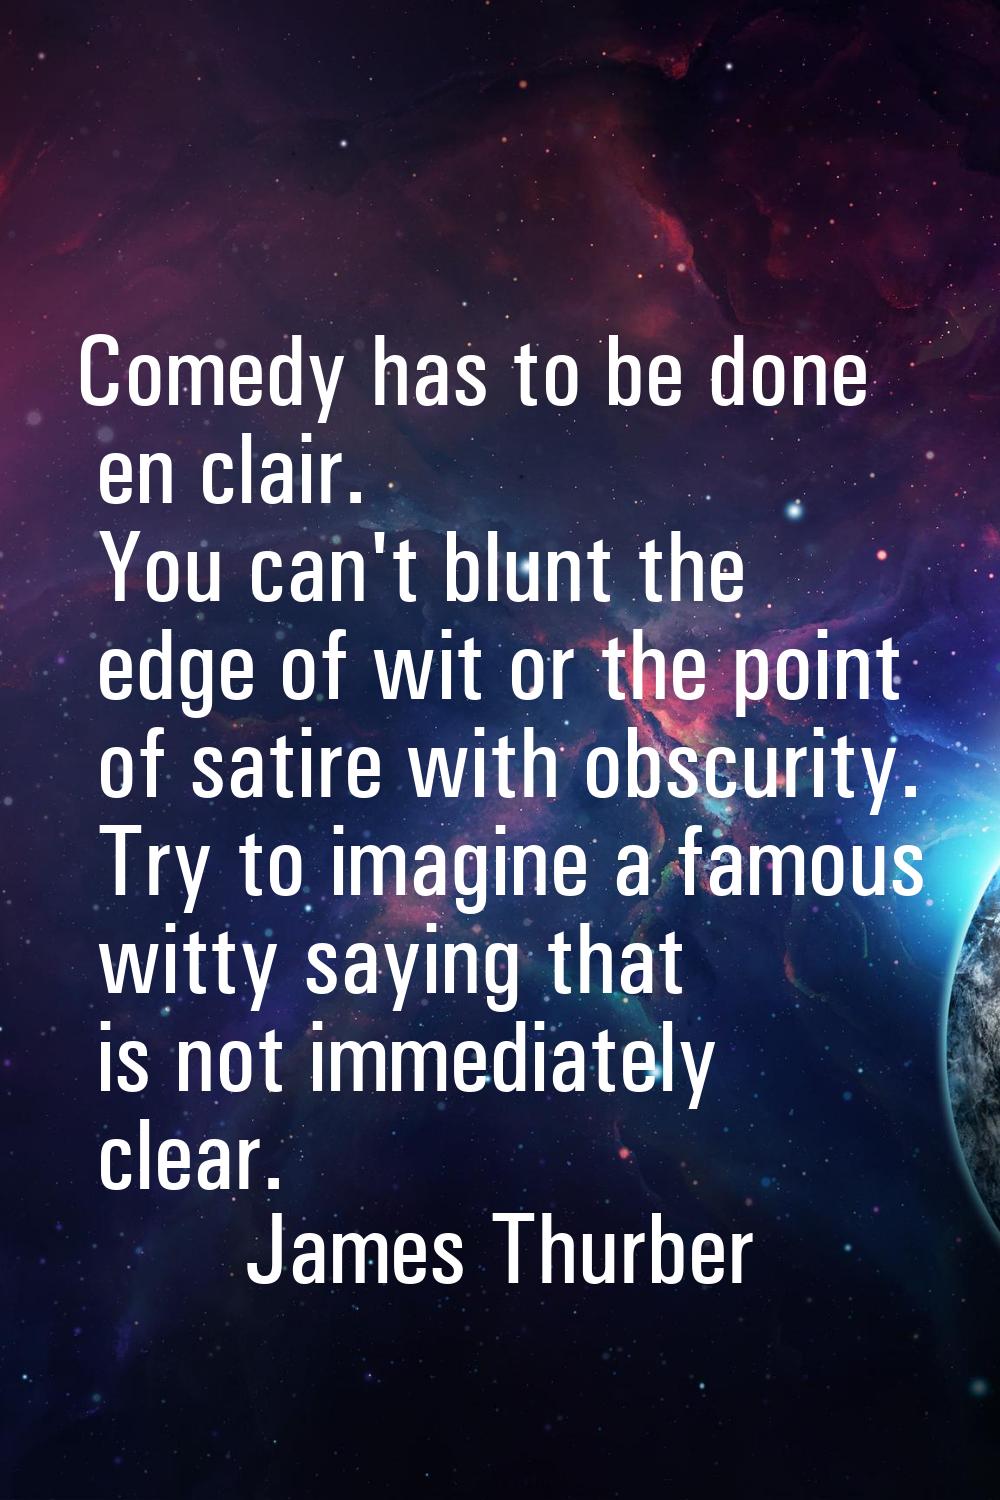 Comedy has to be done en clair. You can't blunt the edge of wit or the point of satire with obscuri